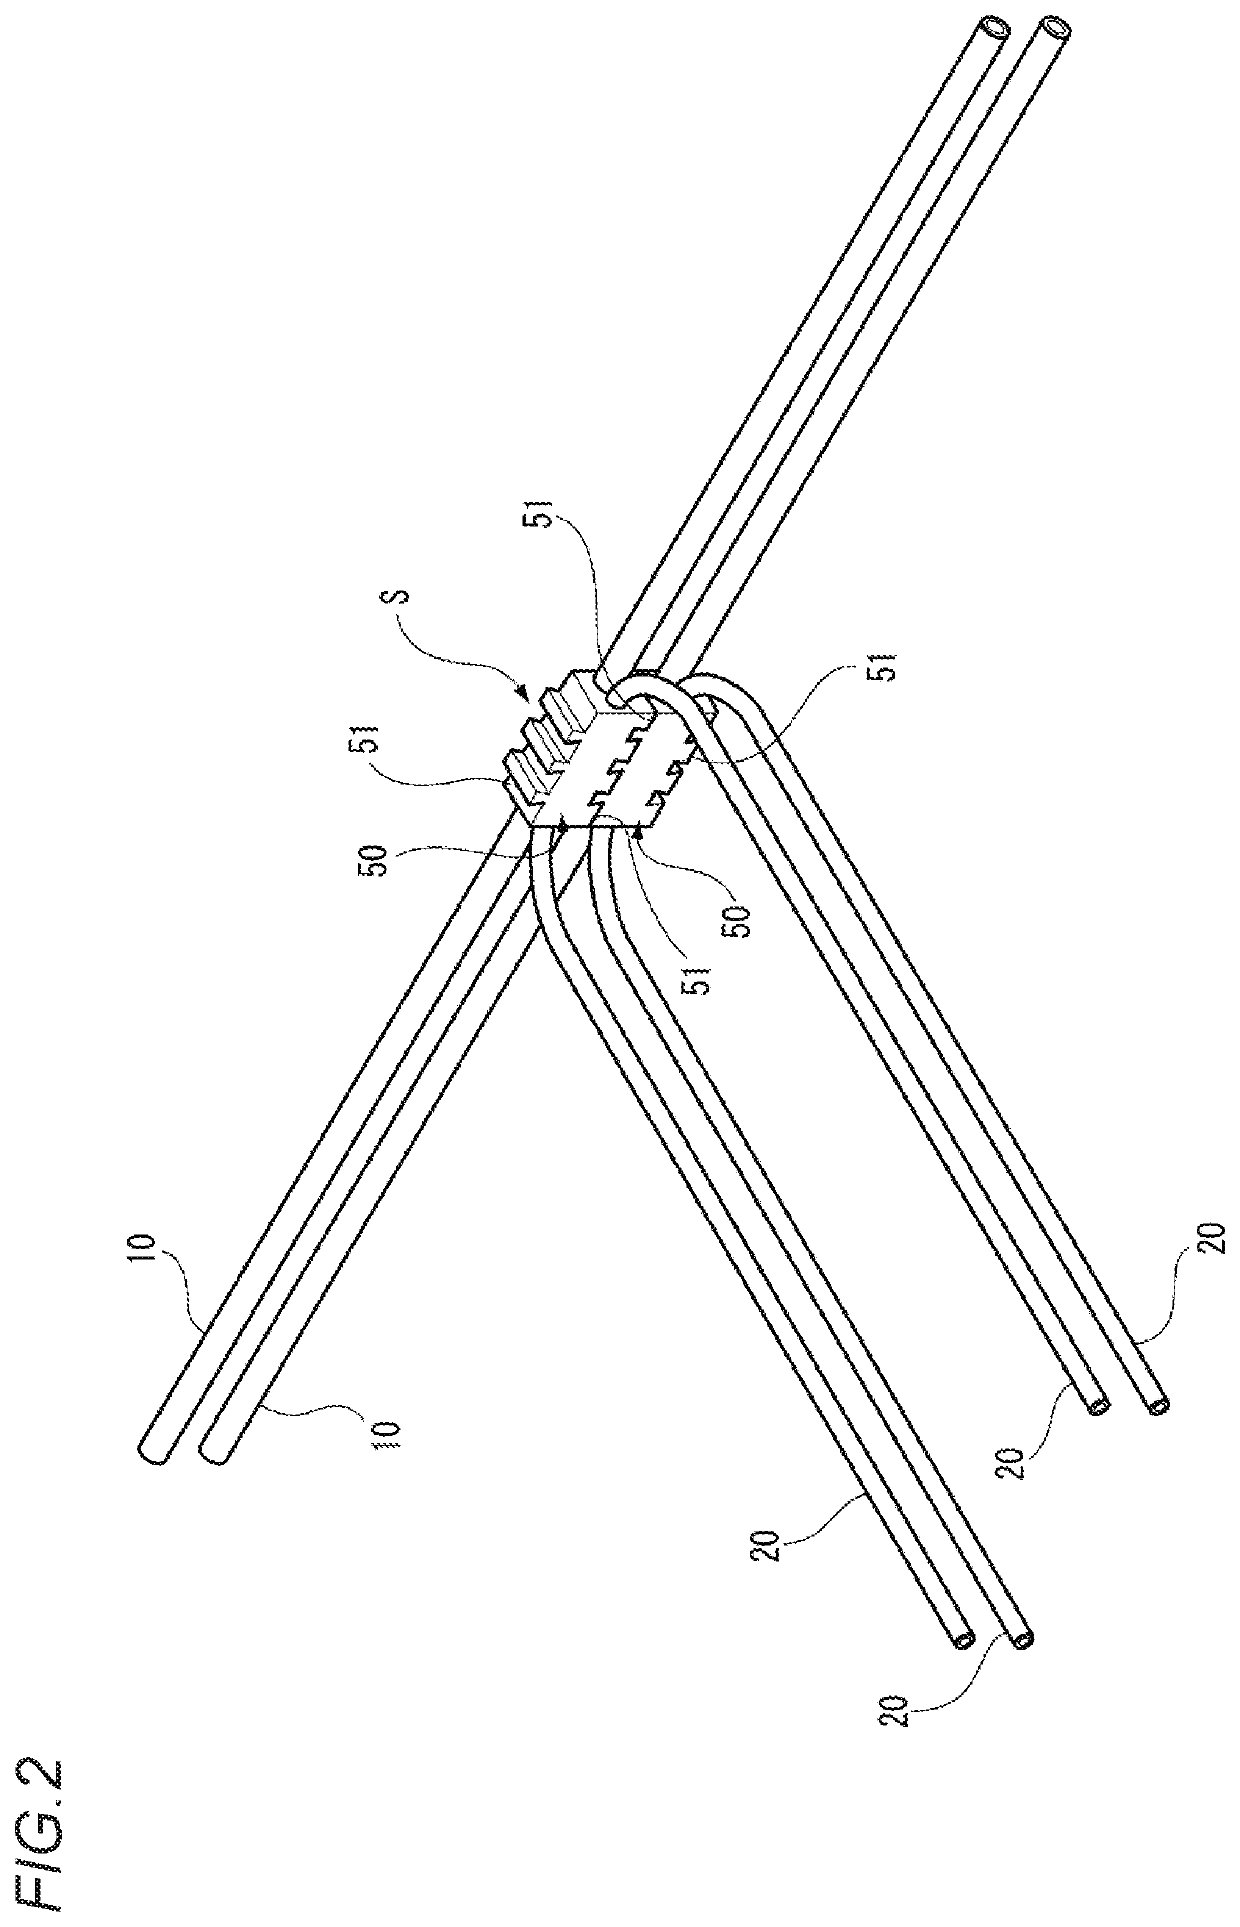 Branching circuit body and branching method of electric wires